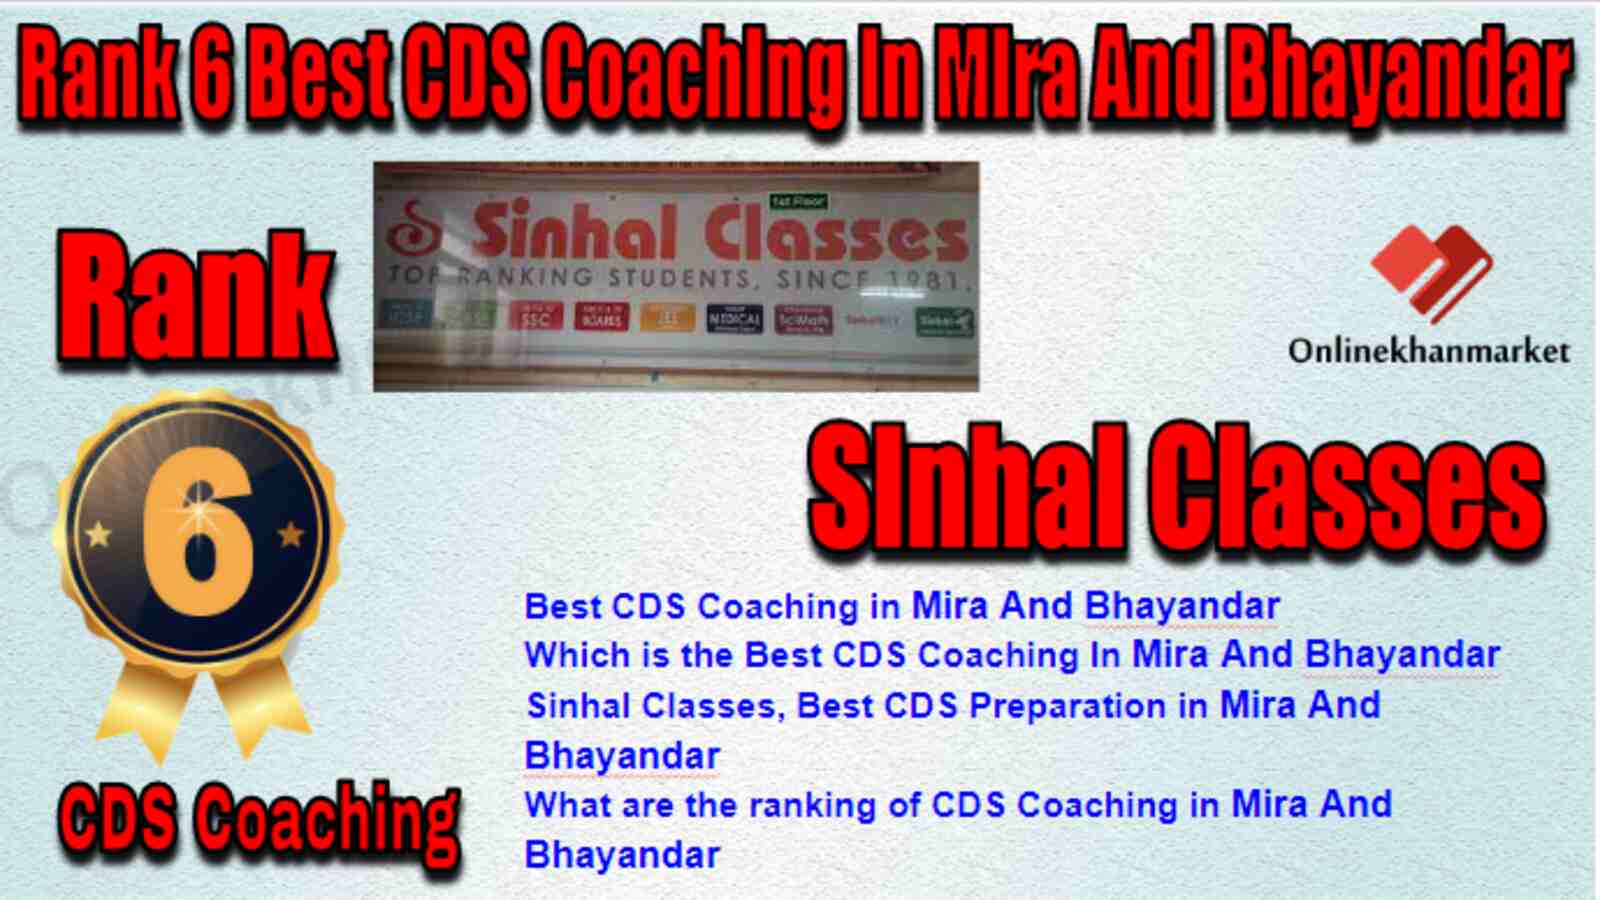 Rank 6 Best CDS Coaching in Mira and Bhayandar